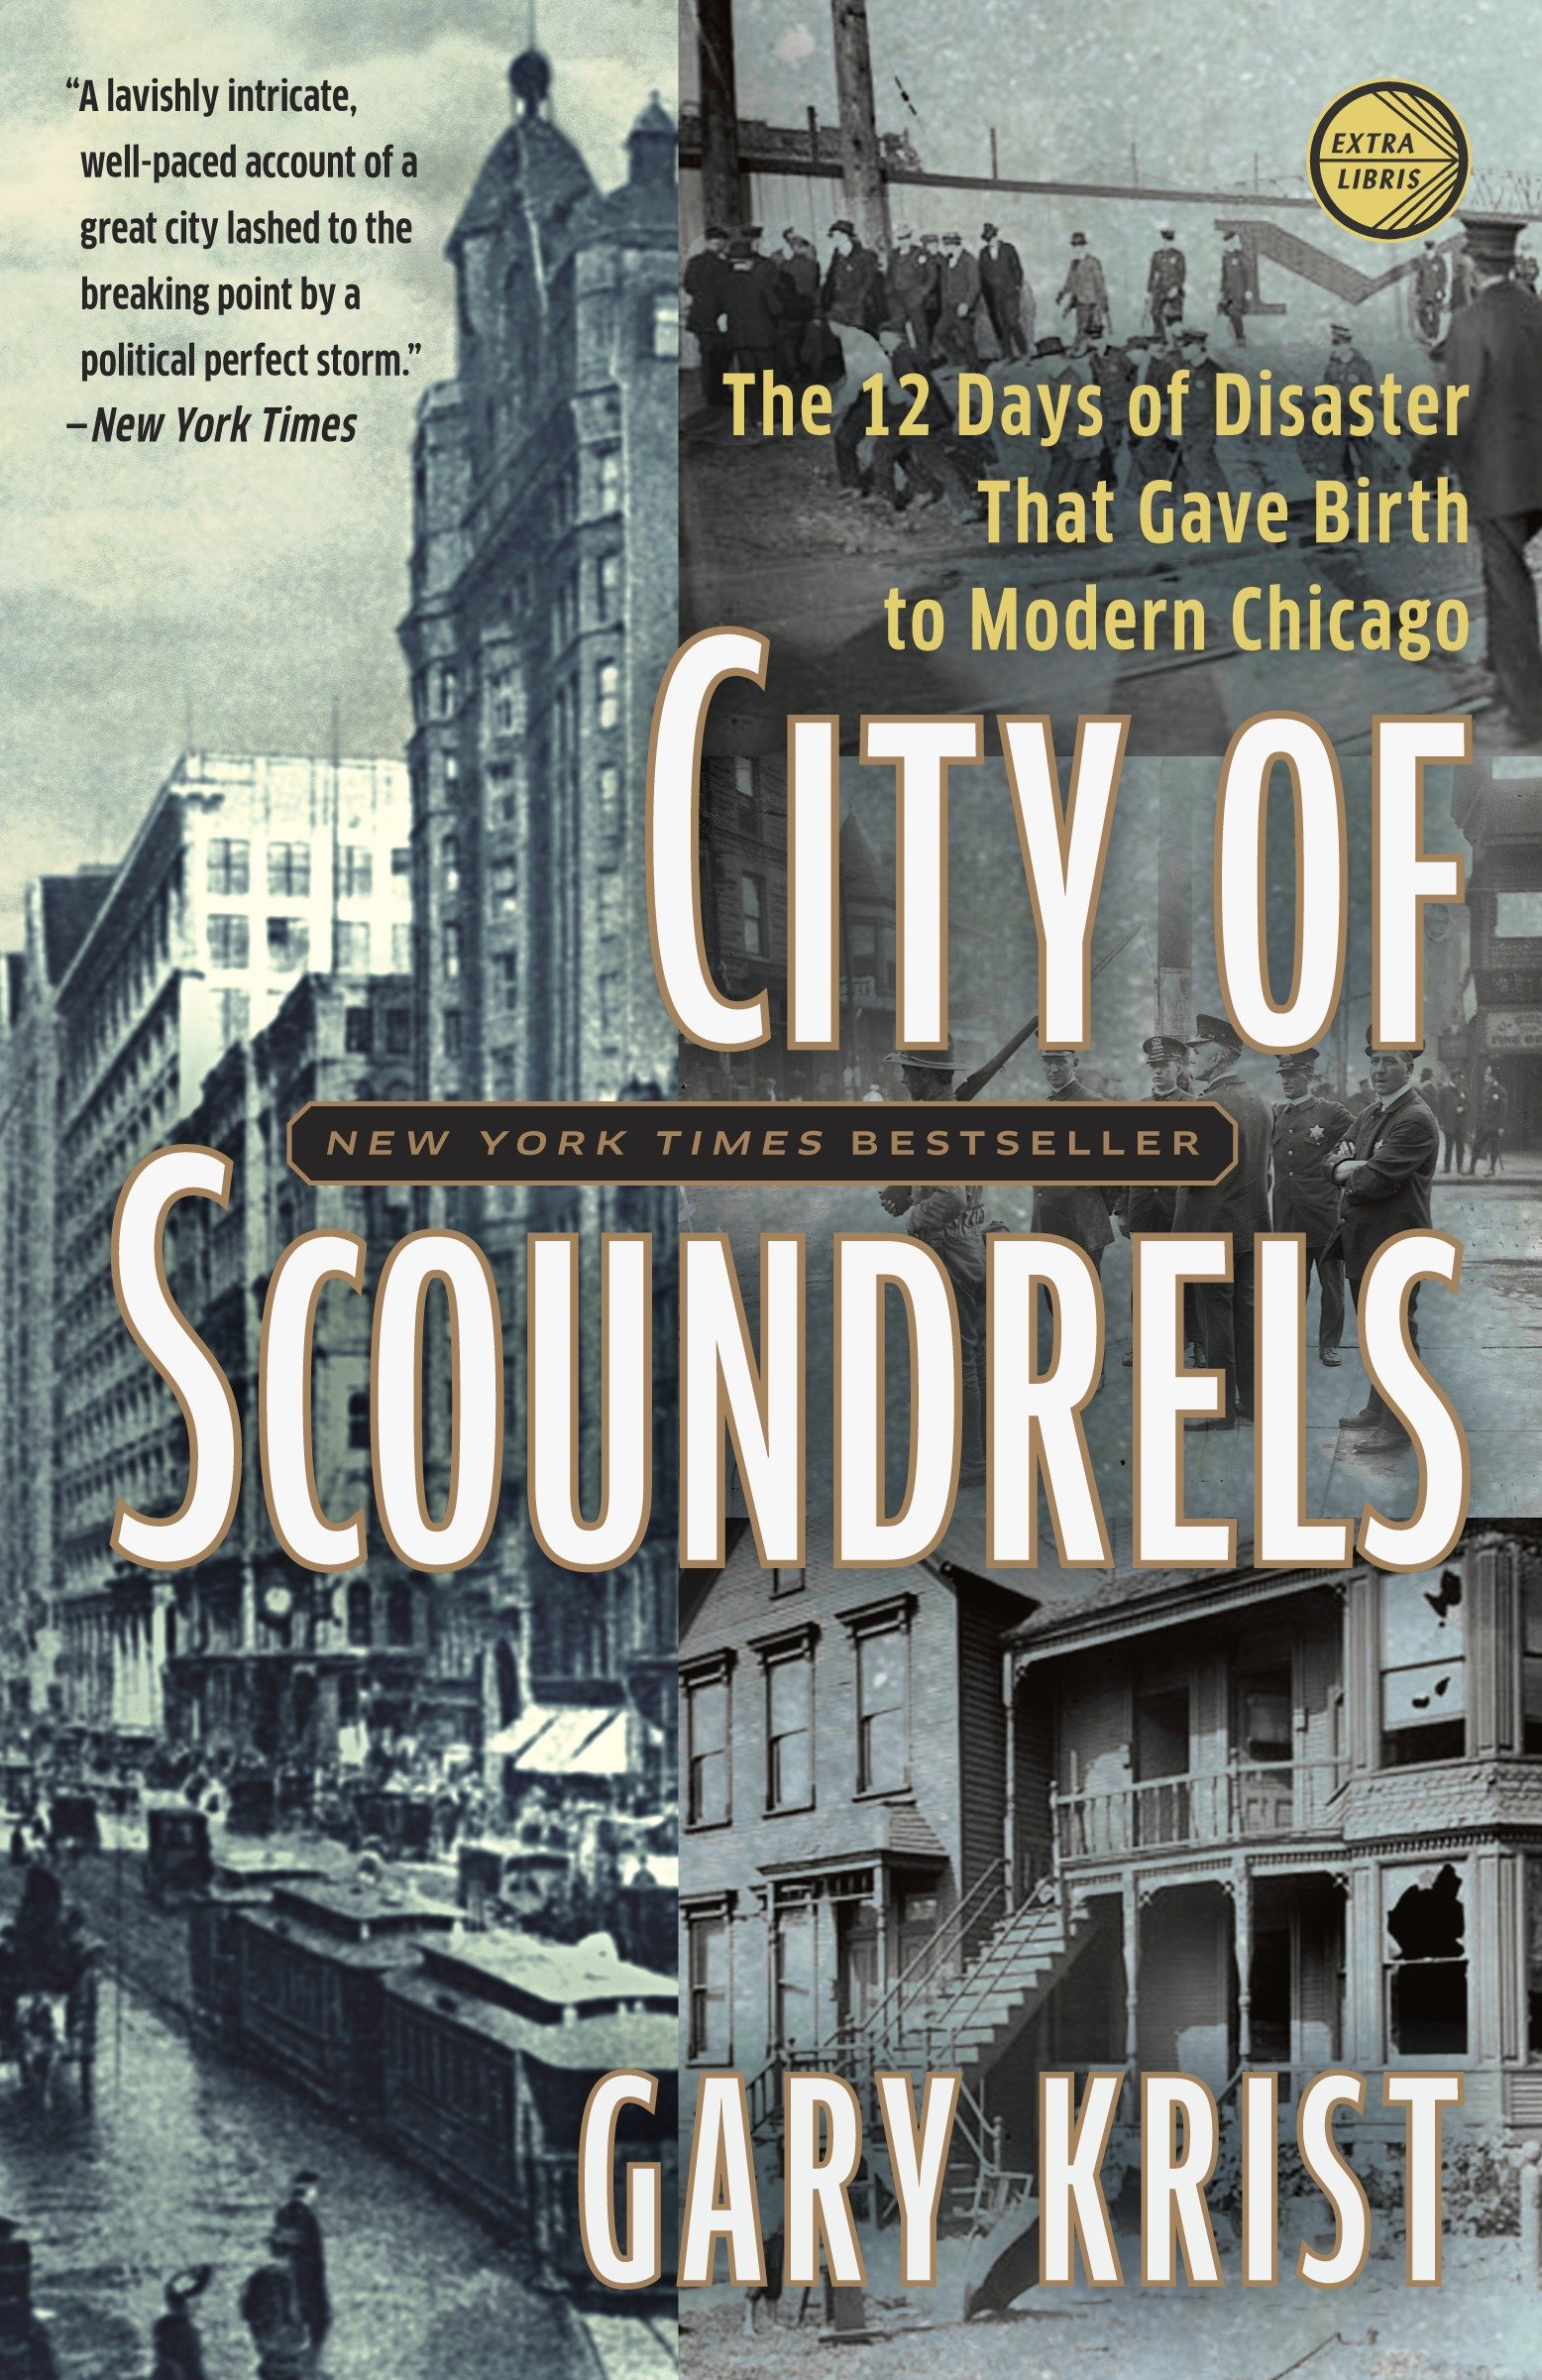 City of scoundrels [the 12 days of disaster that gave birth to modern Chicago] cover image